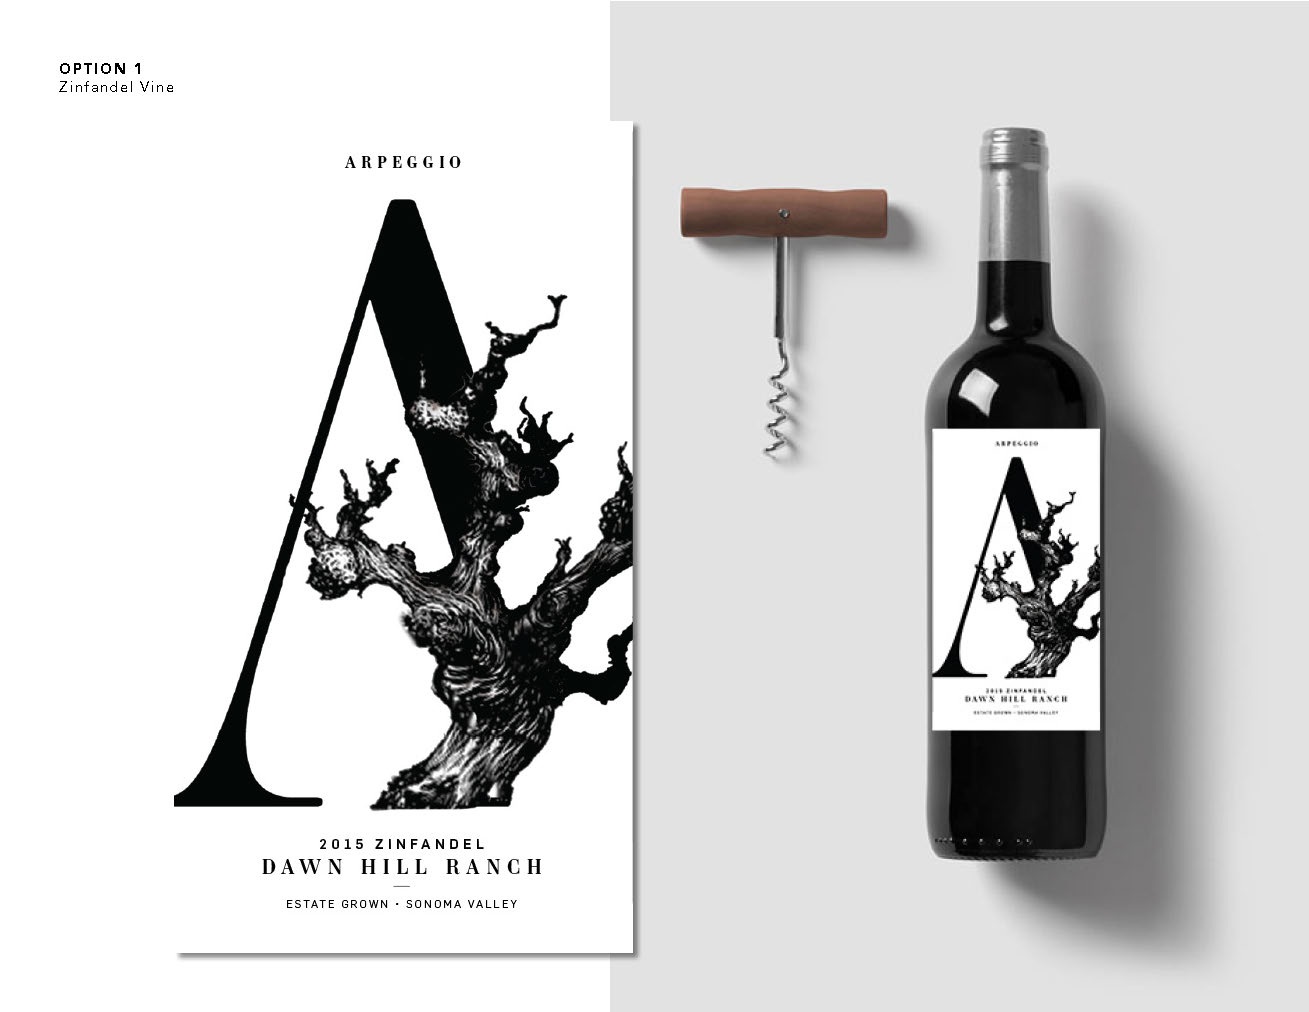  A visual play on “A to Z”, with the prominent A letterform that is only completed with a drawn sketch* of a Zinfandel vine. *FPO artwork by unknown artist 